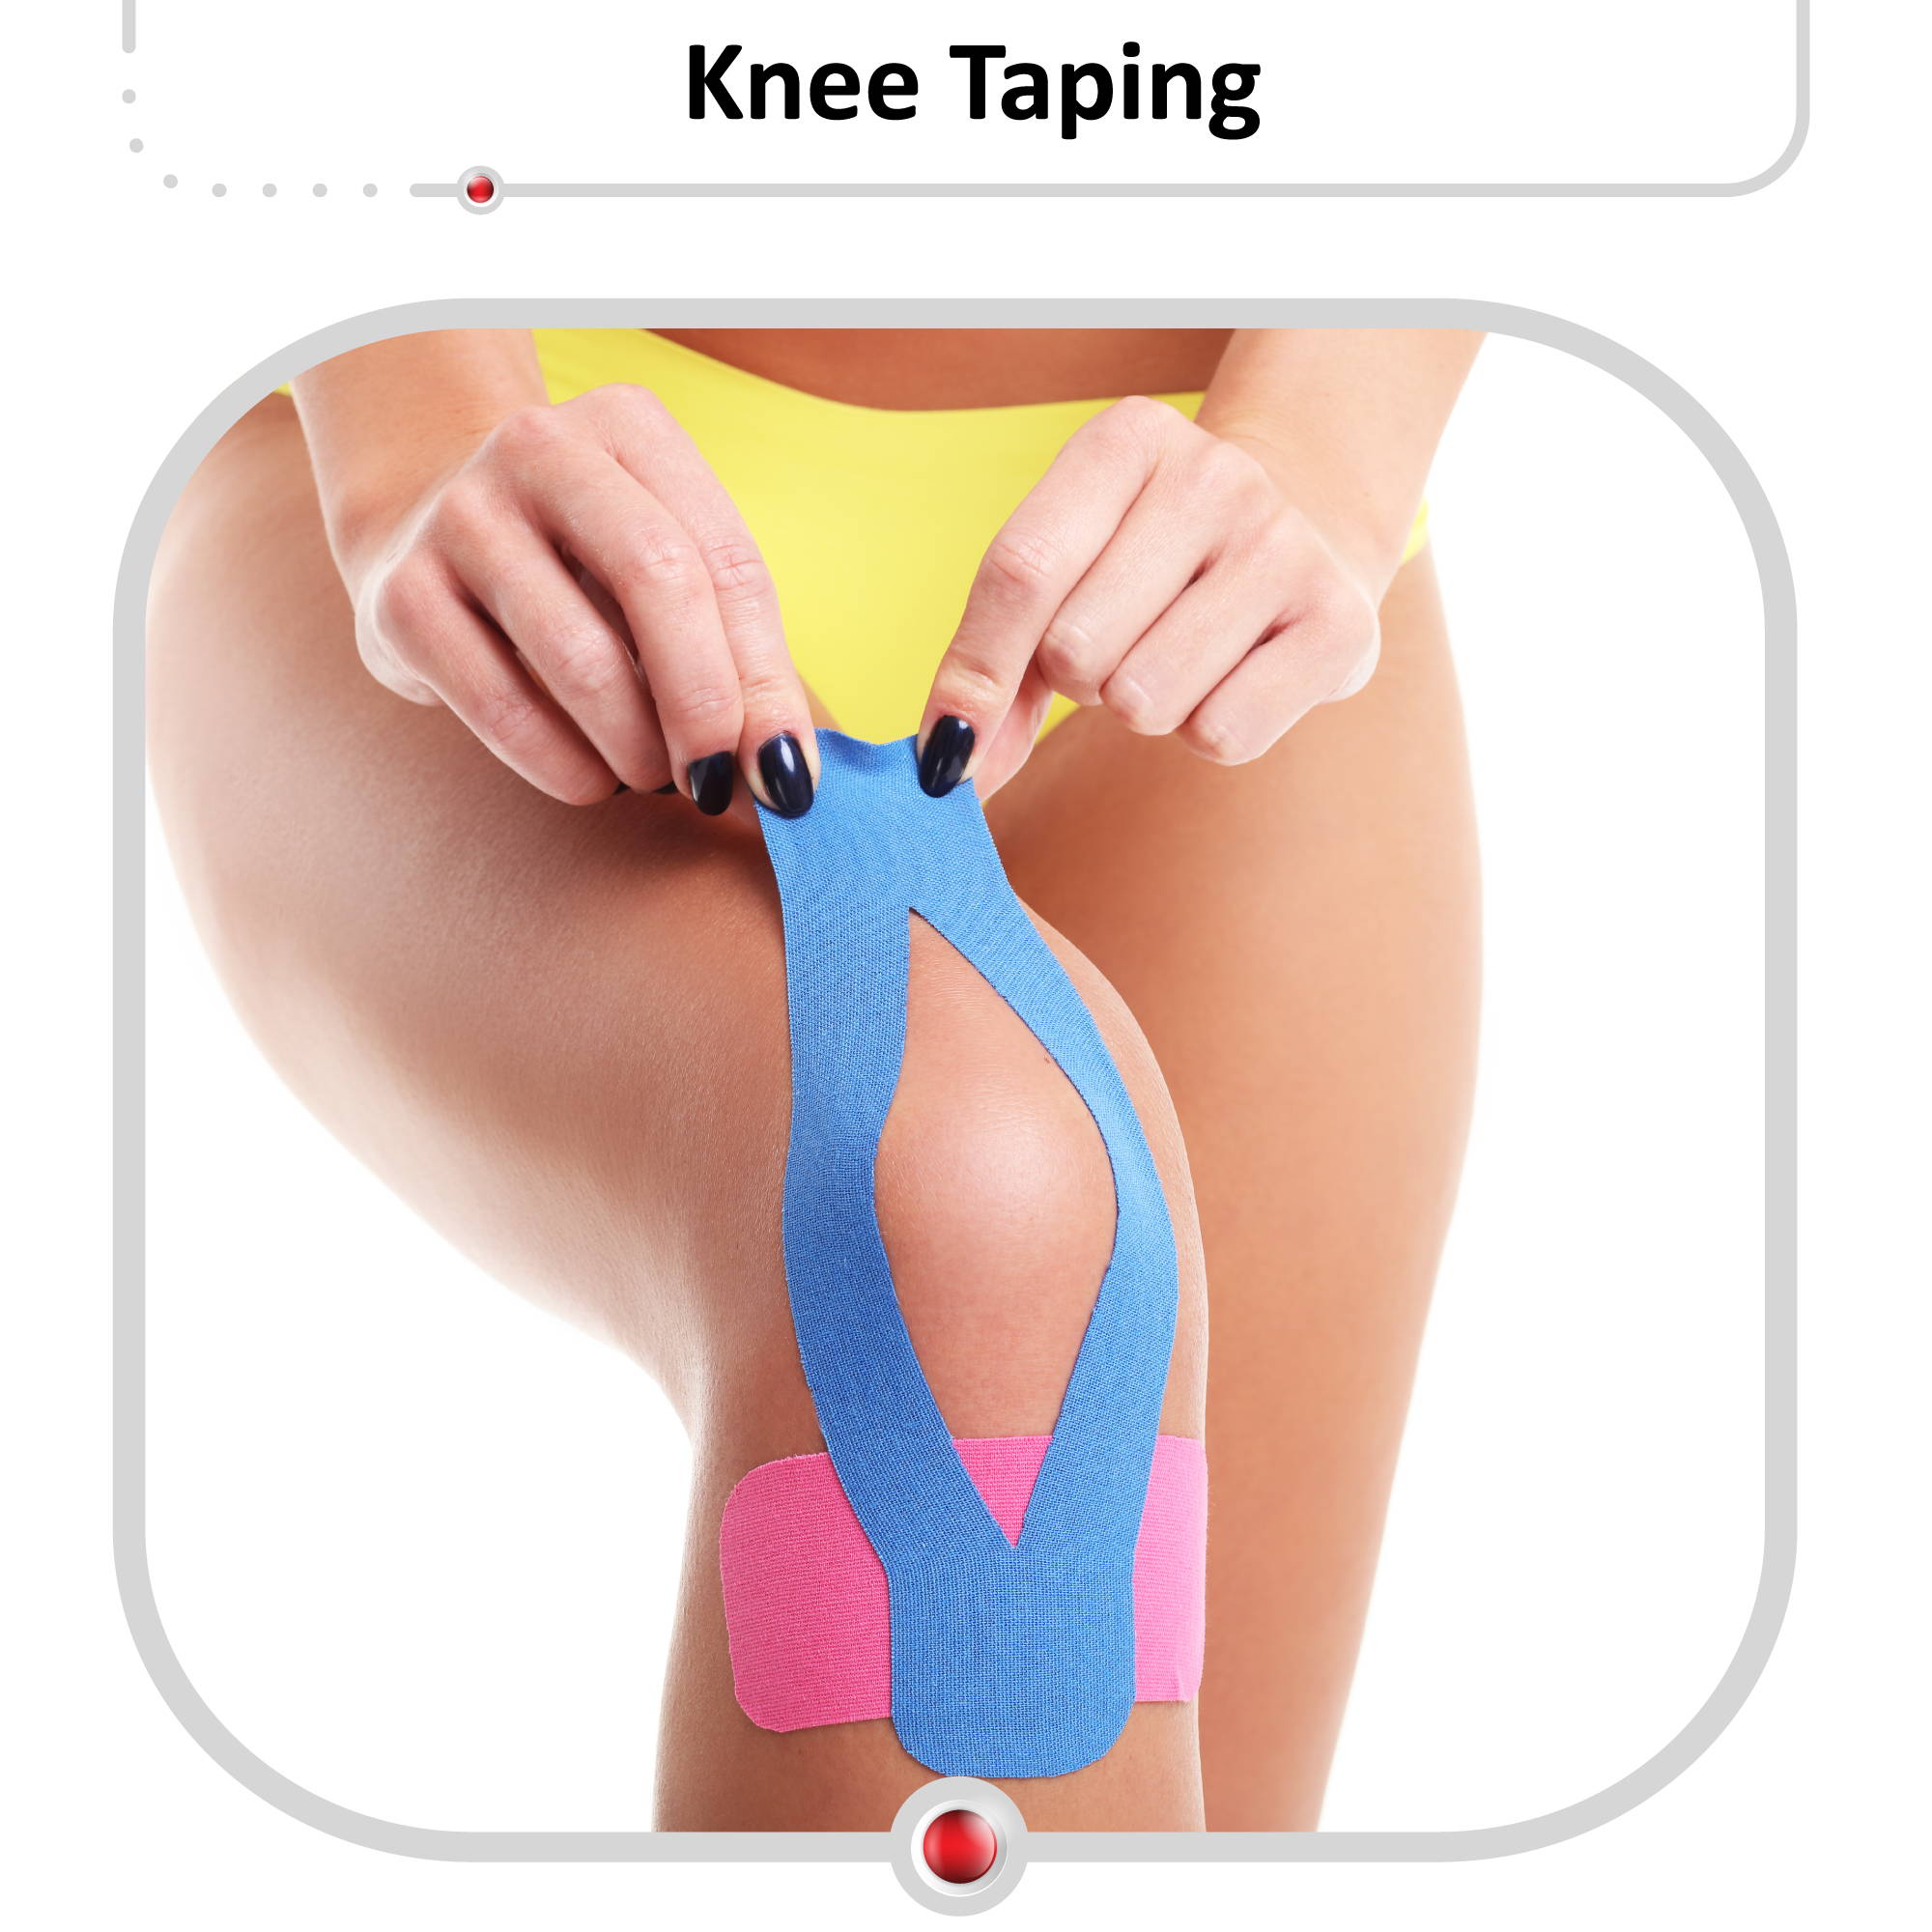 Best Tape for Knee Support